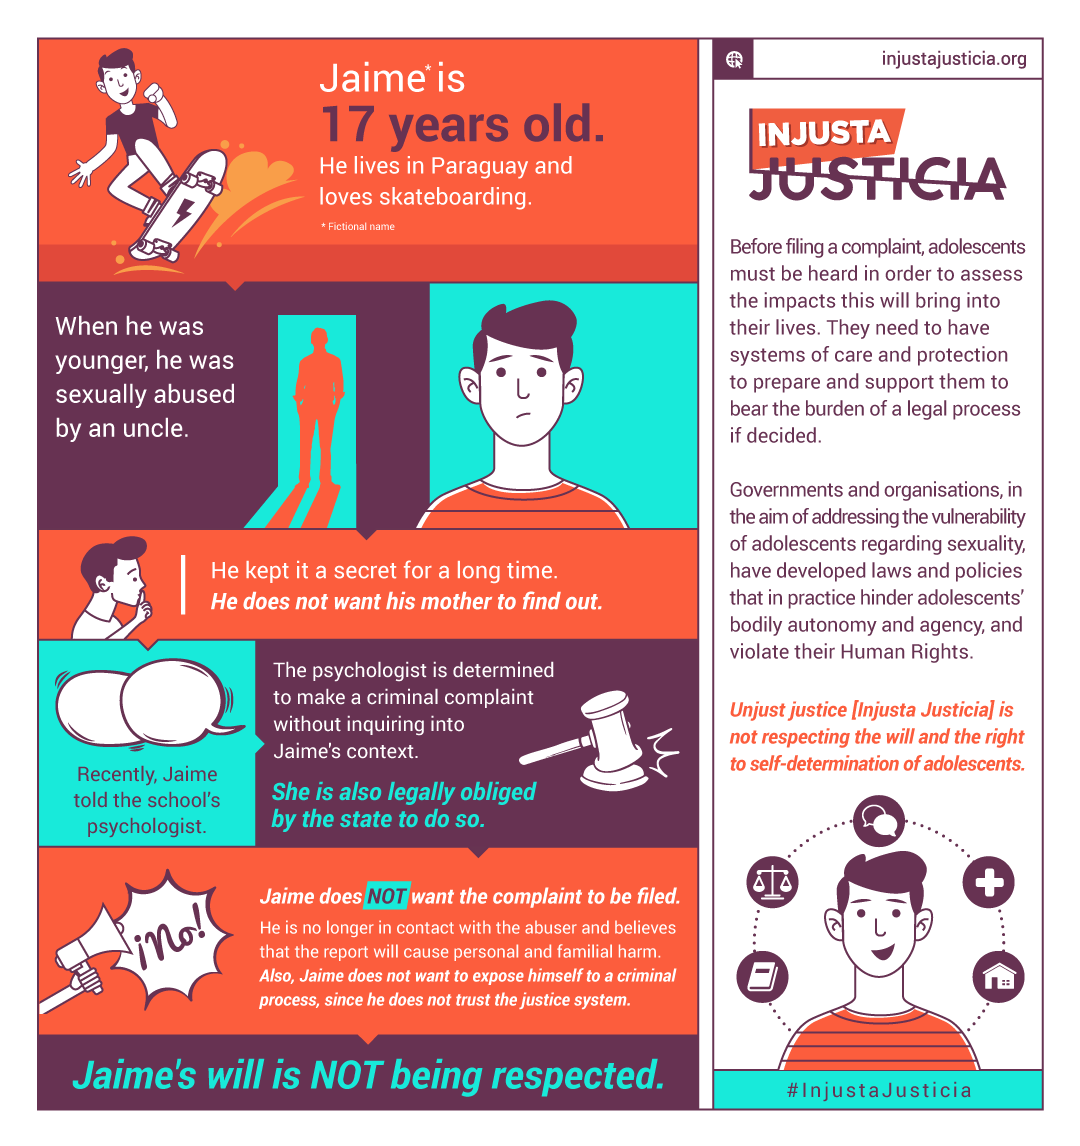 Infographic about Jaime's case, which is explained below. Full description available for download.